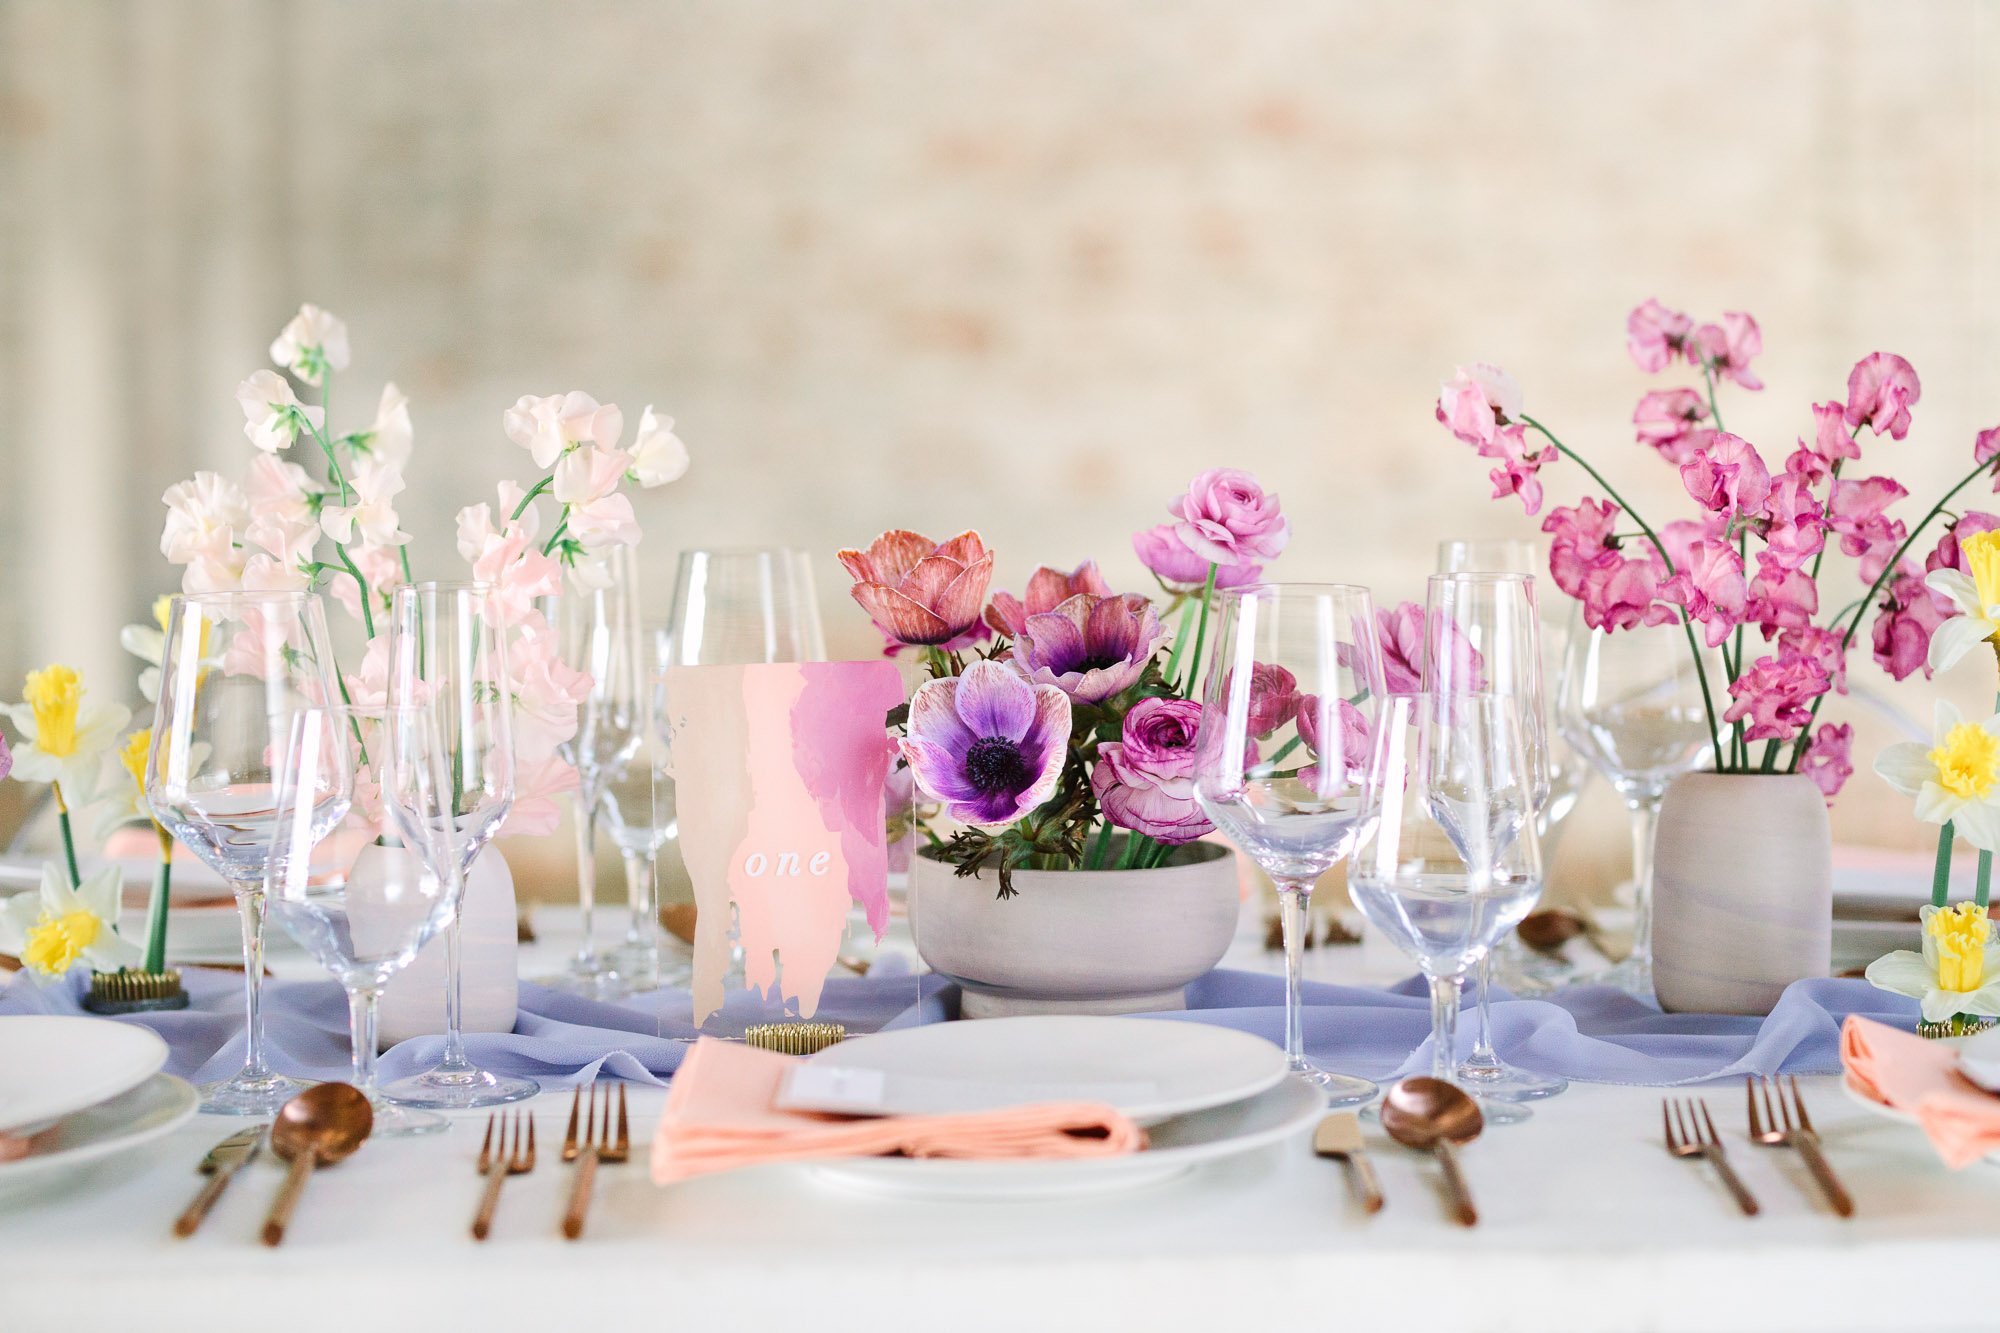 Springtime wedding table by Mary Costa Photography